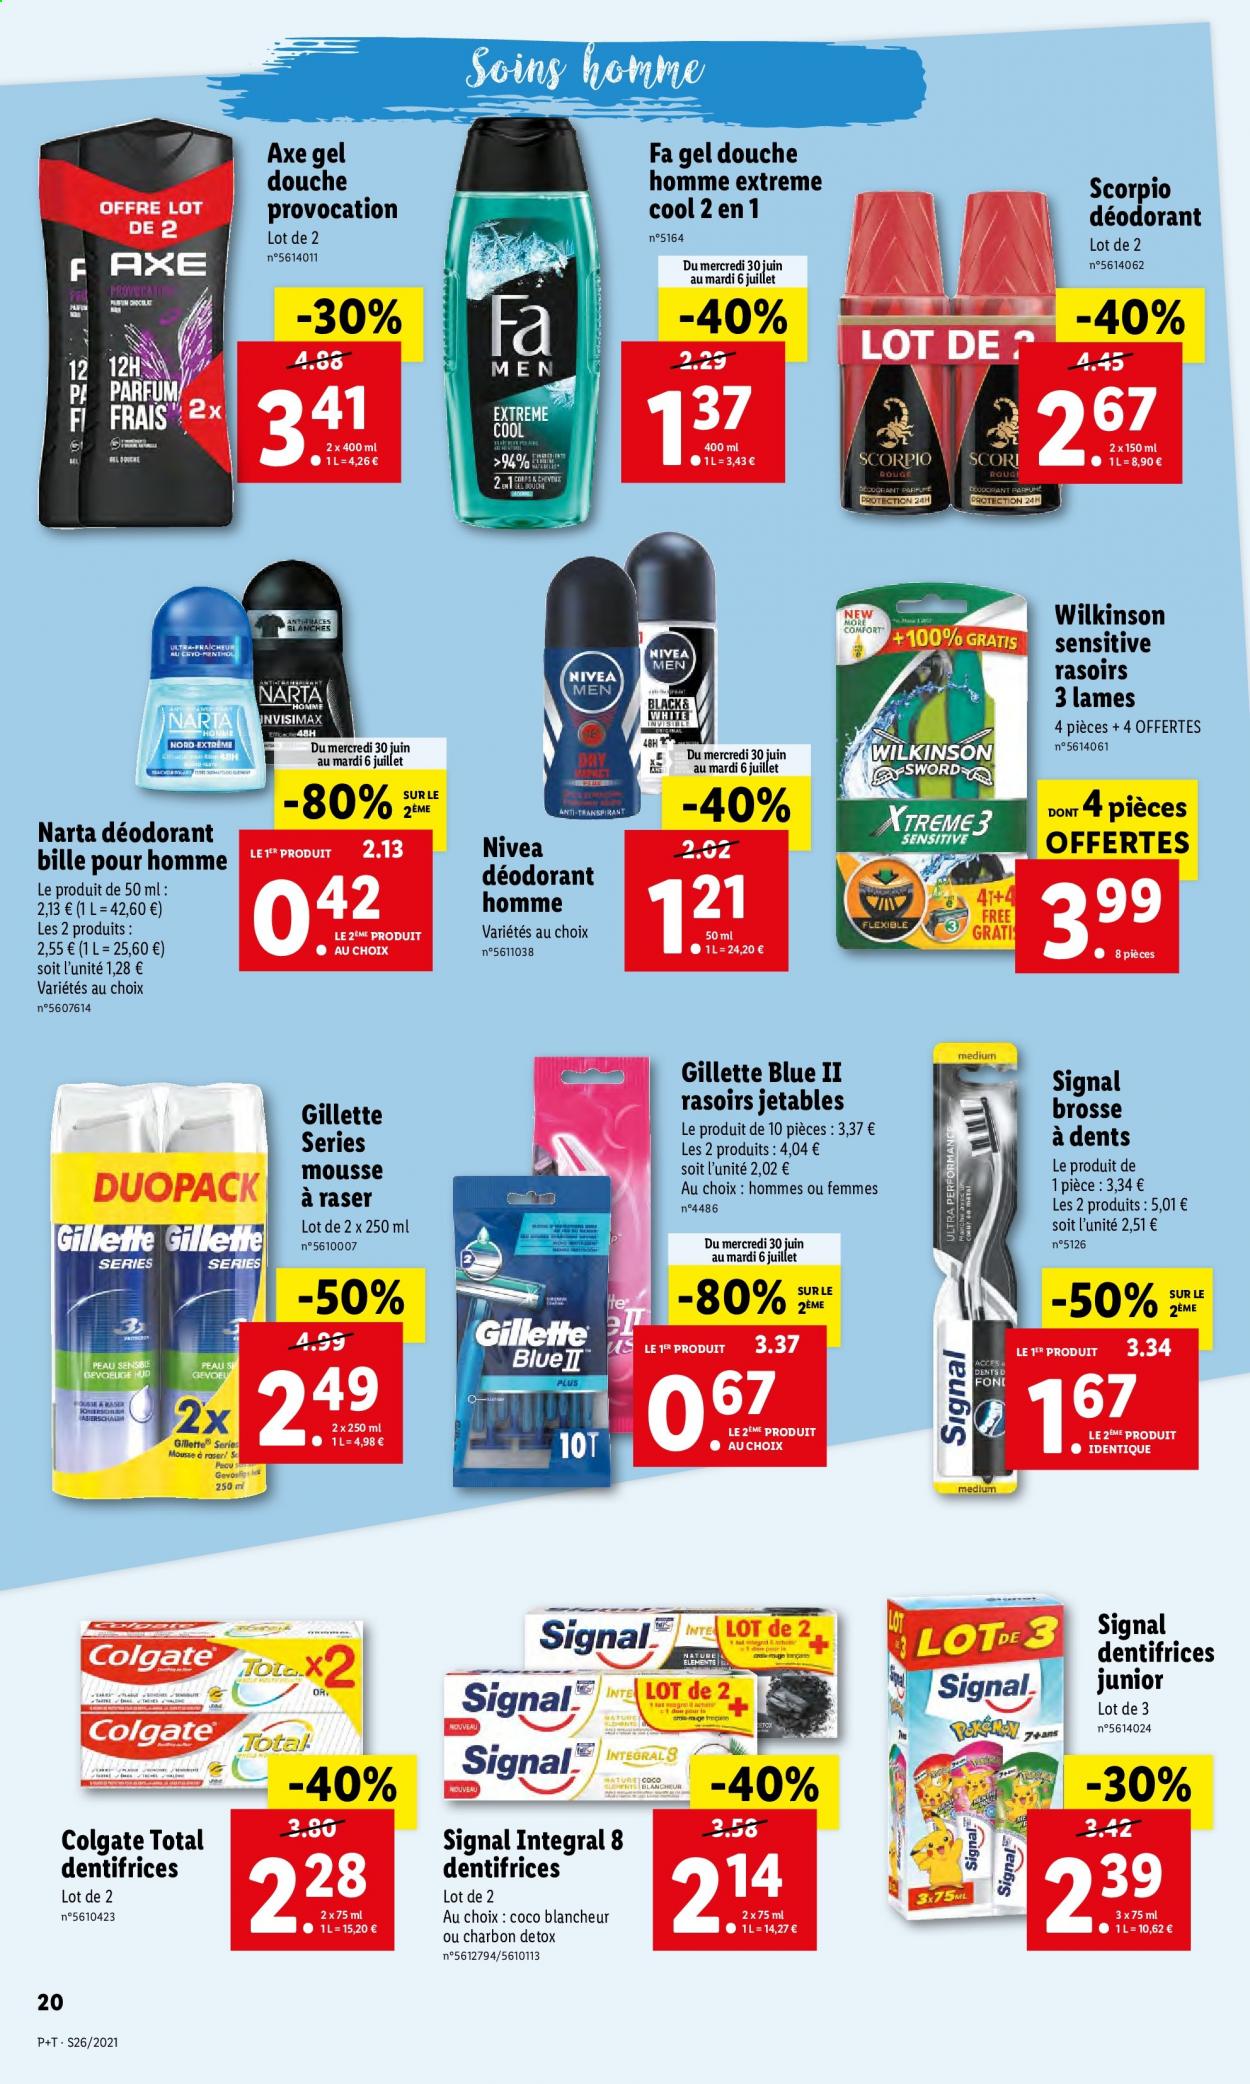 Catalogue Lidl - 30.06.2021 - 06.07.2021. Page 24.